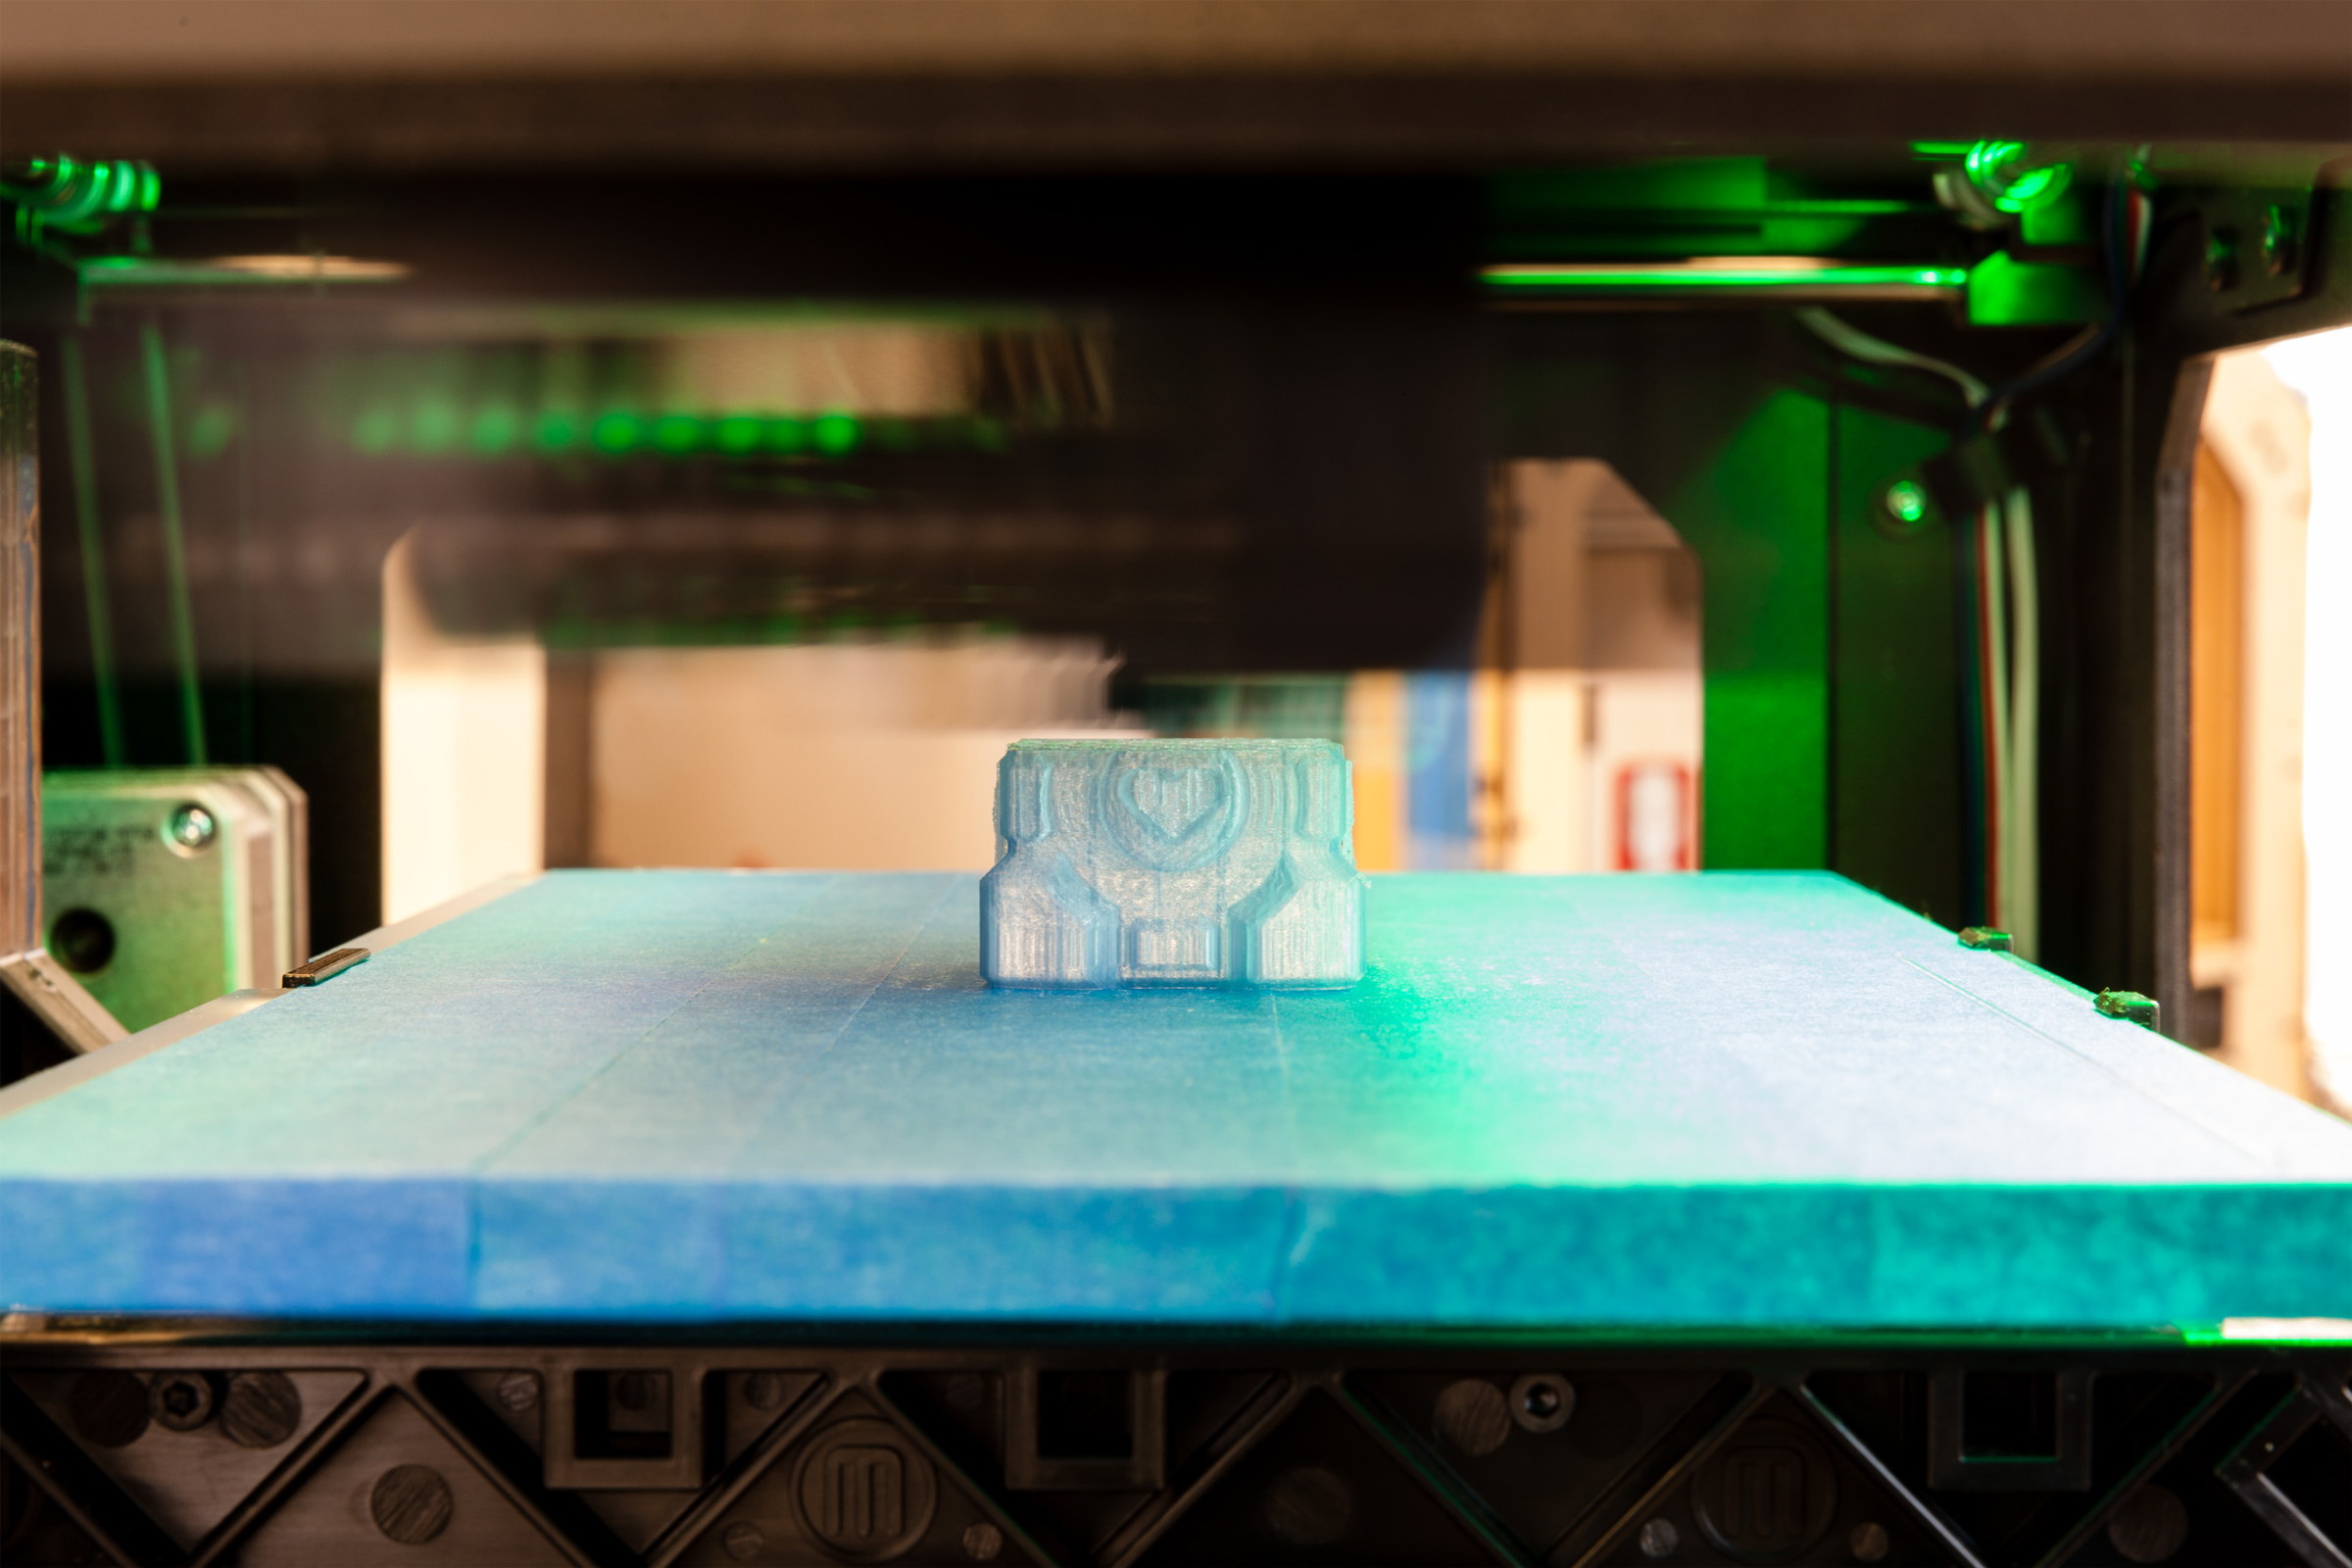 [Default image] Makerspace printing in process